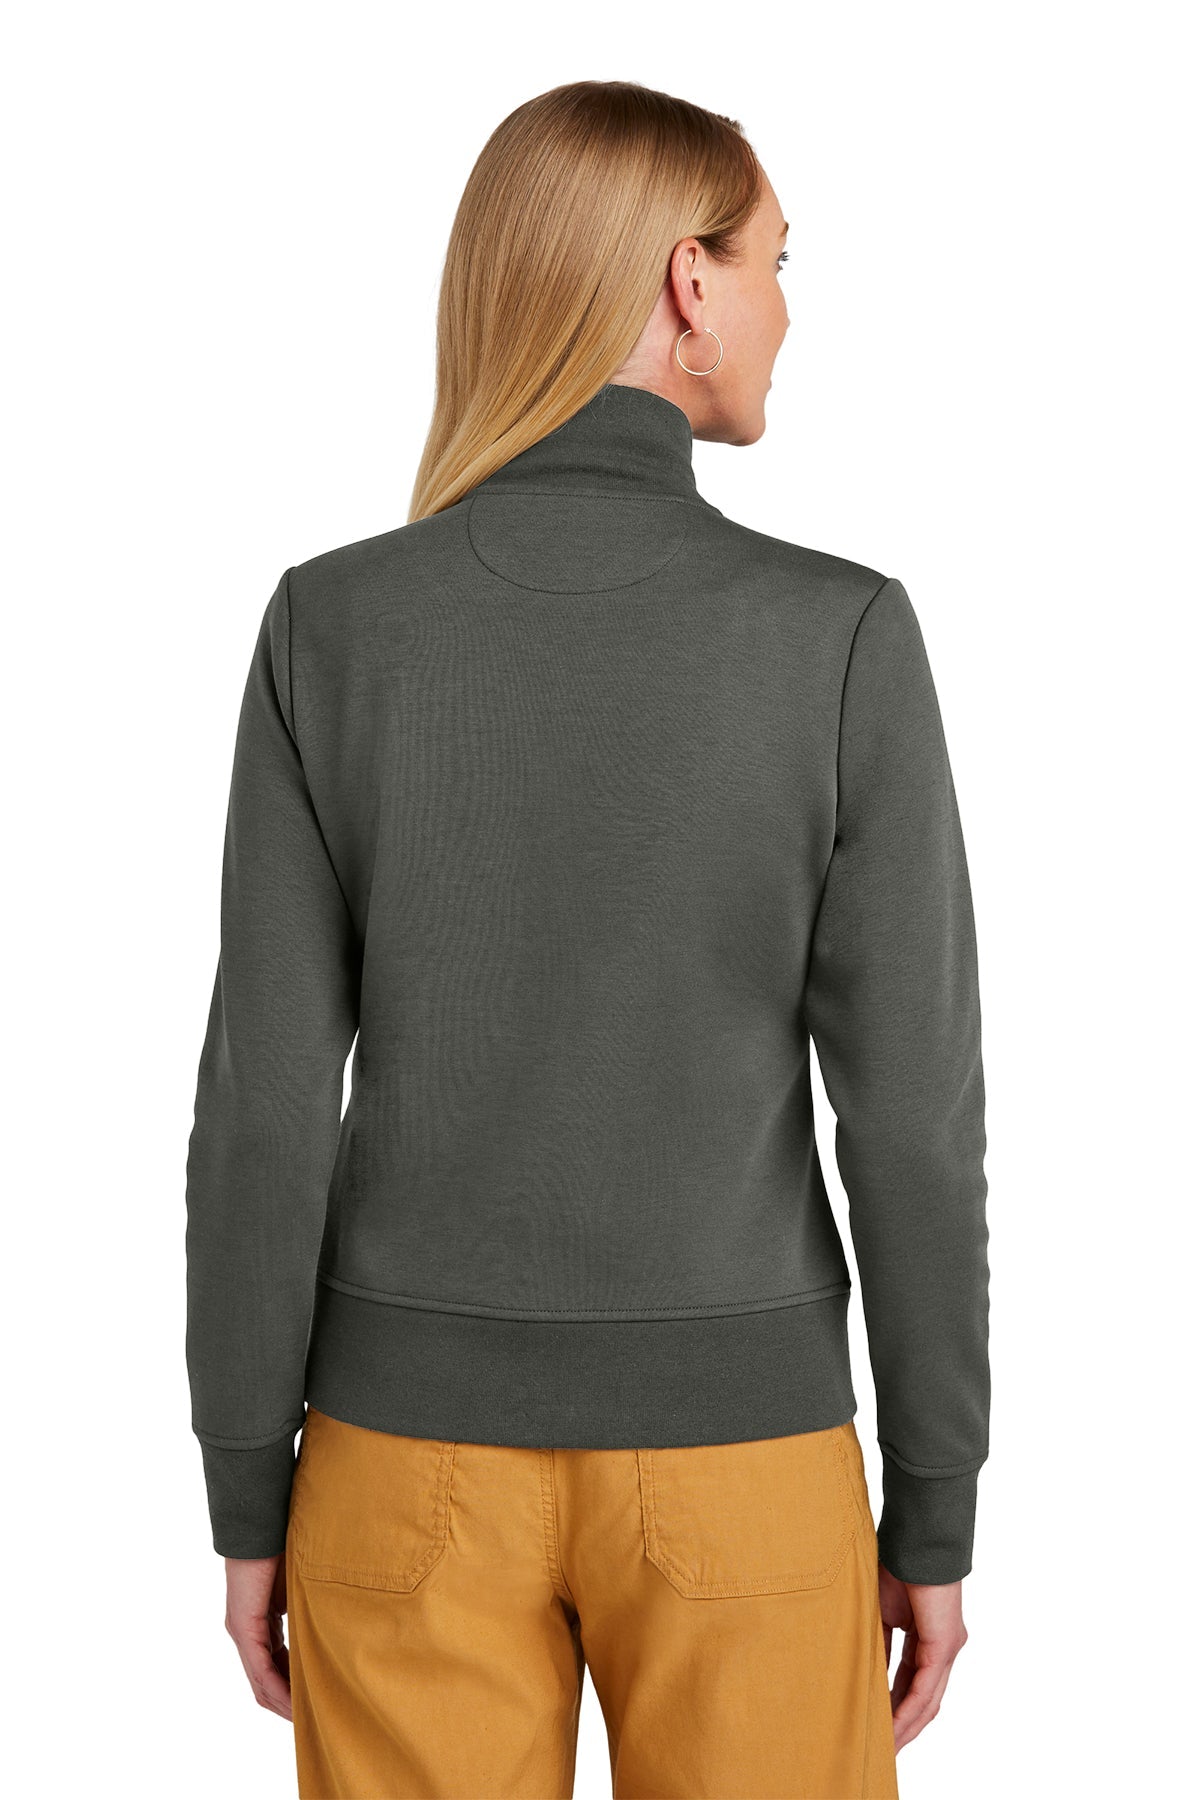 Brooks Brothers Womens Double-Knit Full-Zip, Windsor Grey